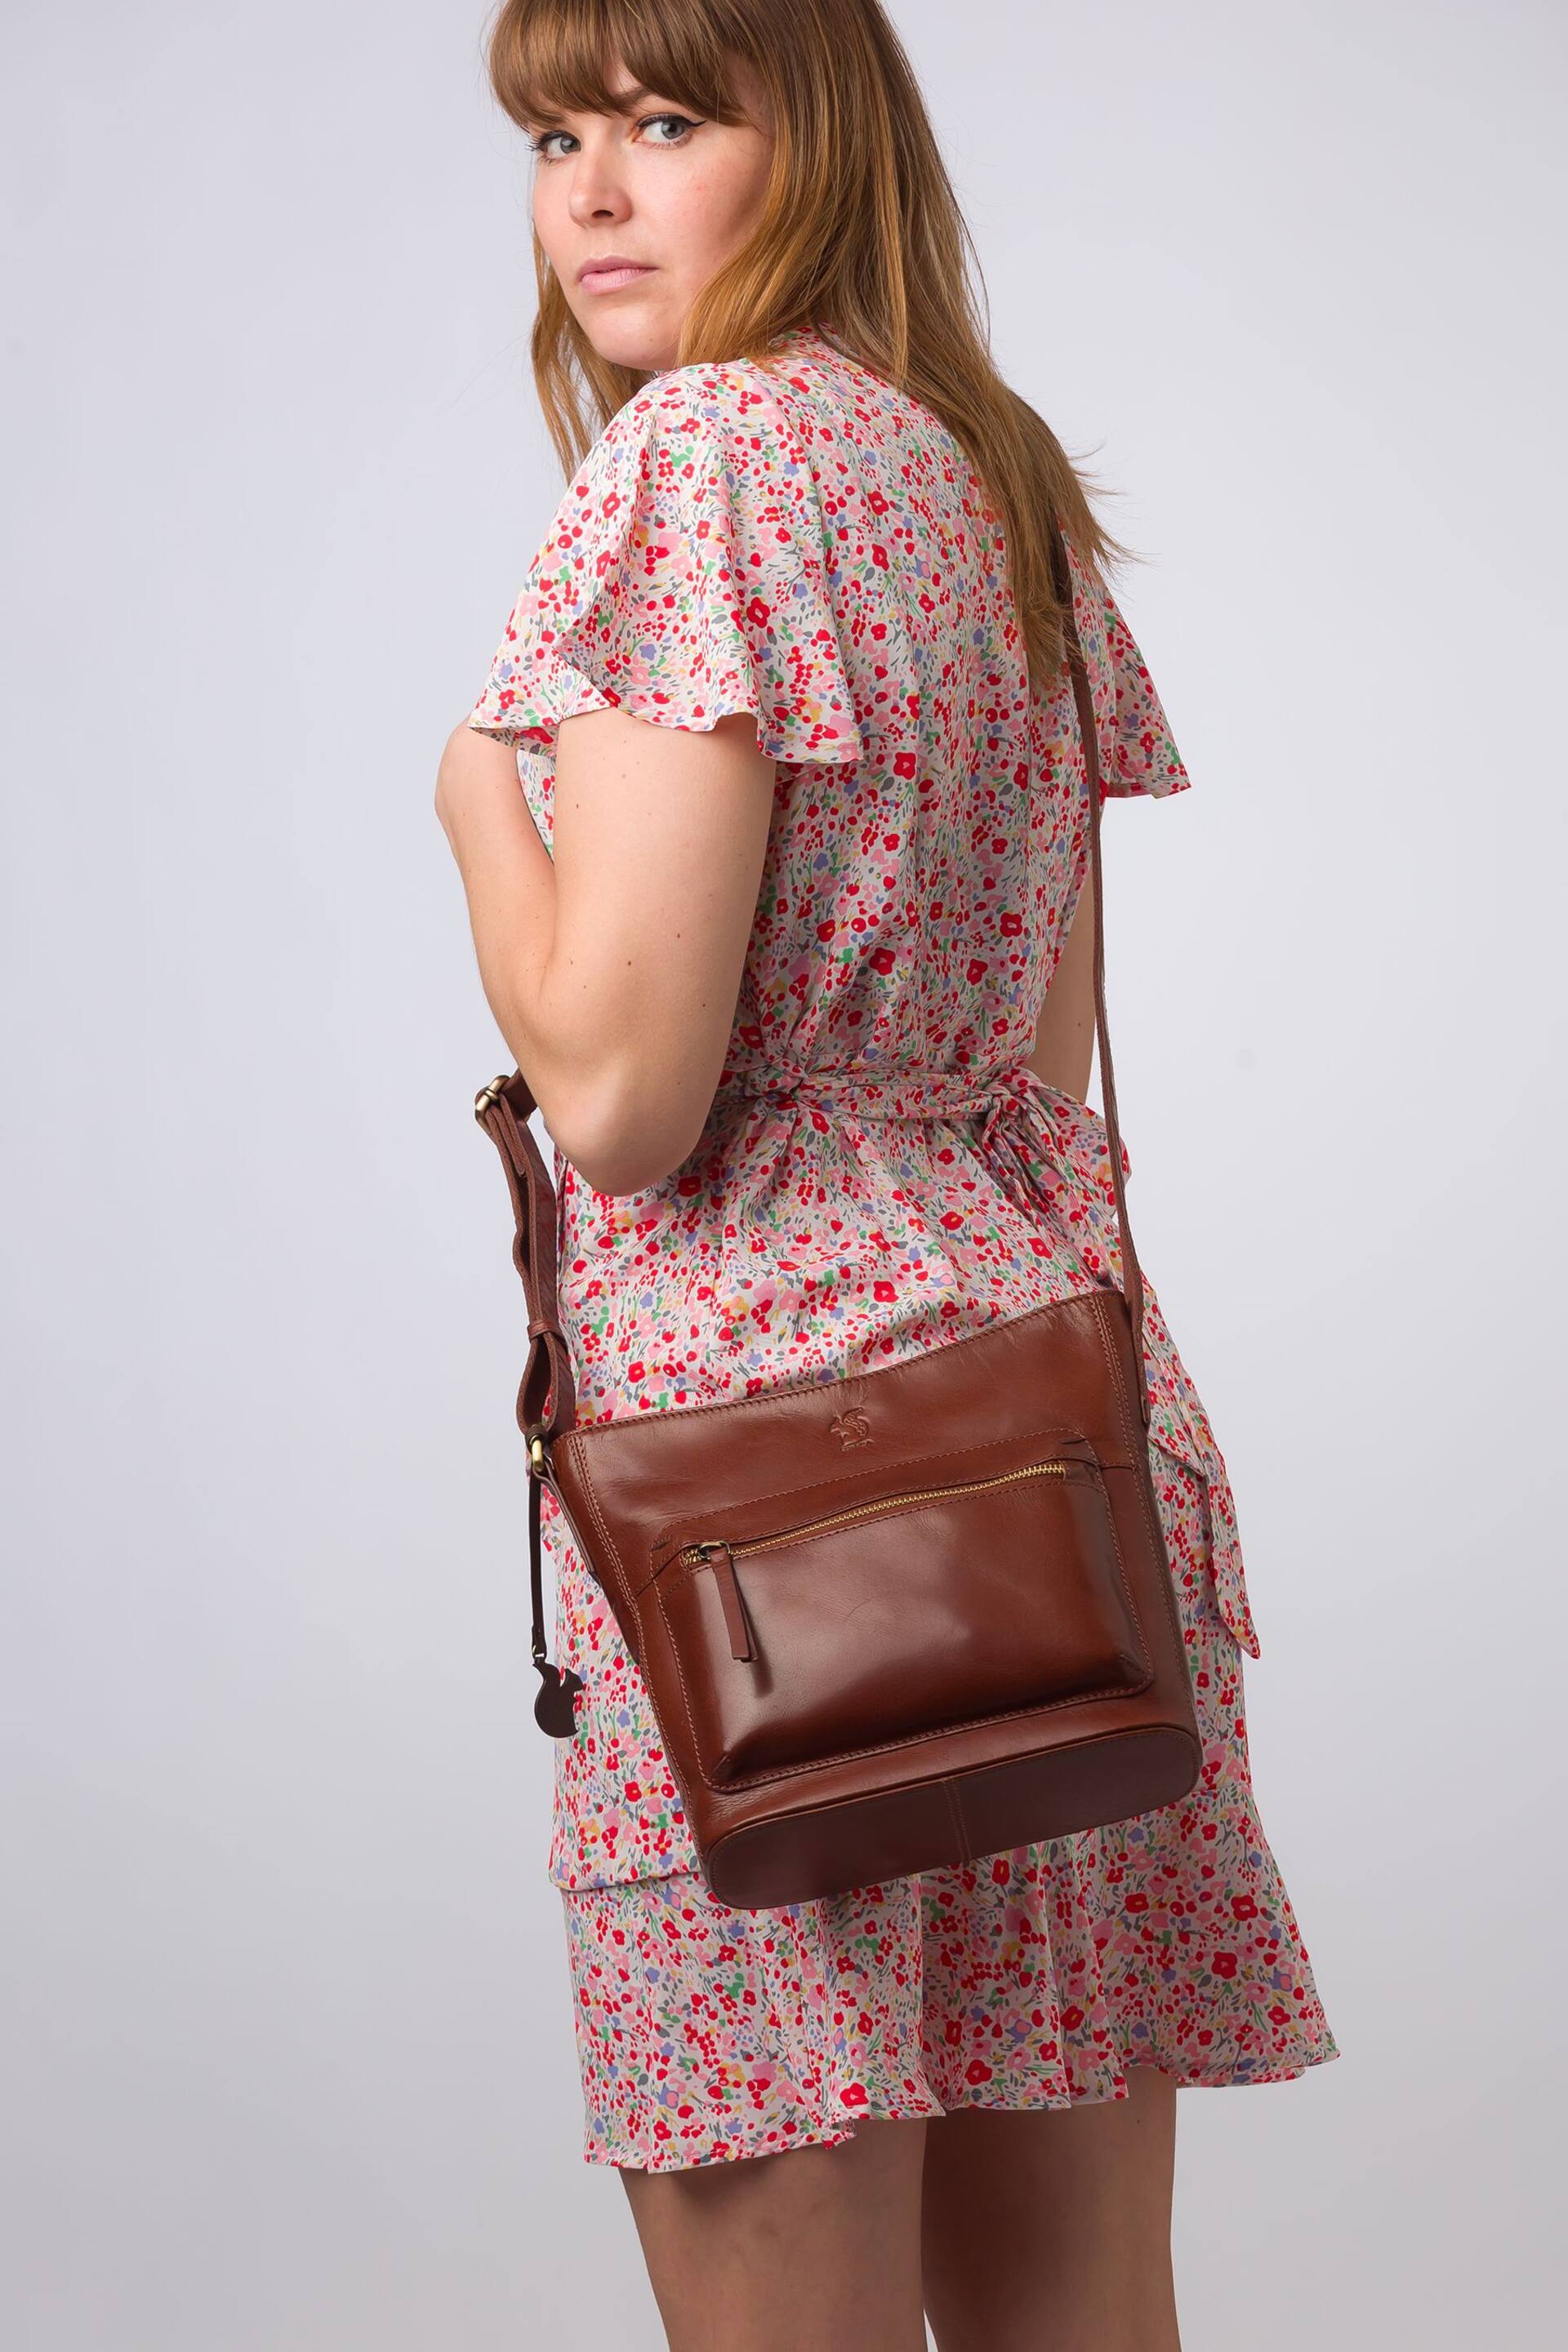 Conkca 'Liberty' Leather Shoulder Bag - Image 1 of 7